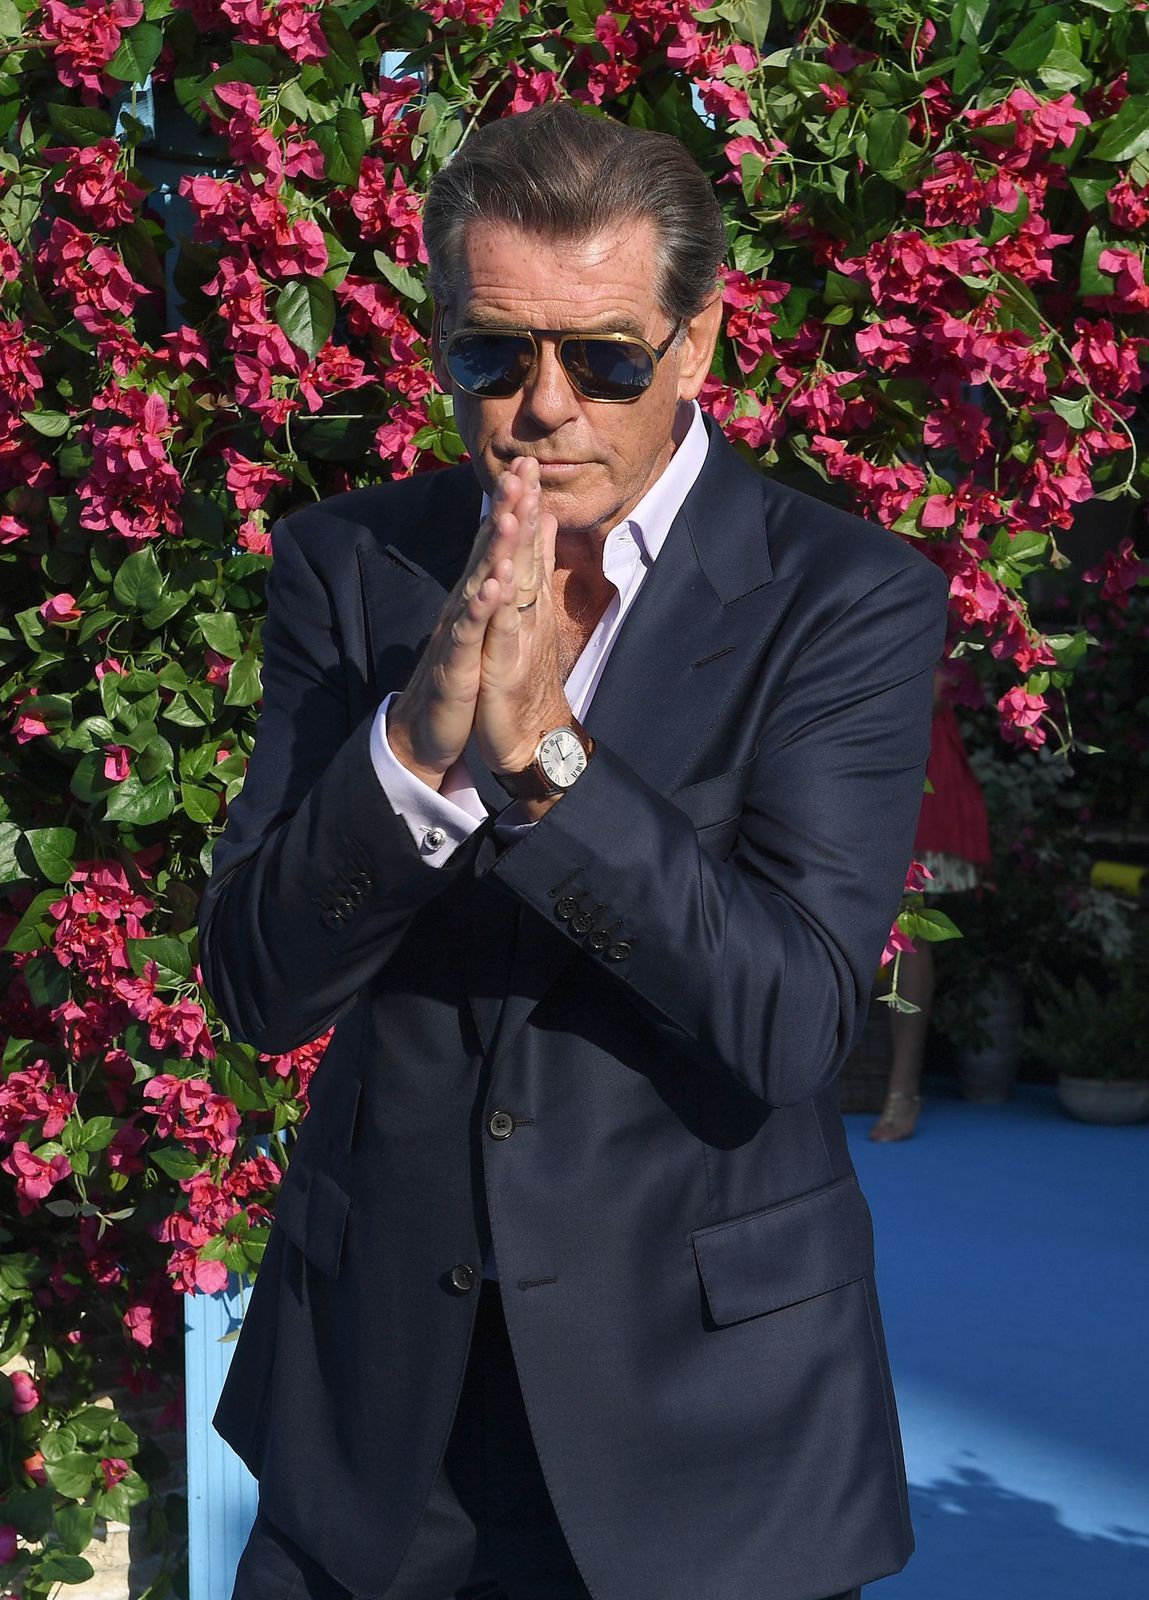 Pierce Brosnan at the "Mamma Mia! Here We Go Again" world premiere on July 16, 2018, in London, England | Photo: Stuart C. Wilson/Getty Images